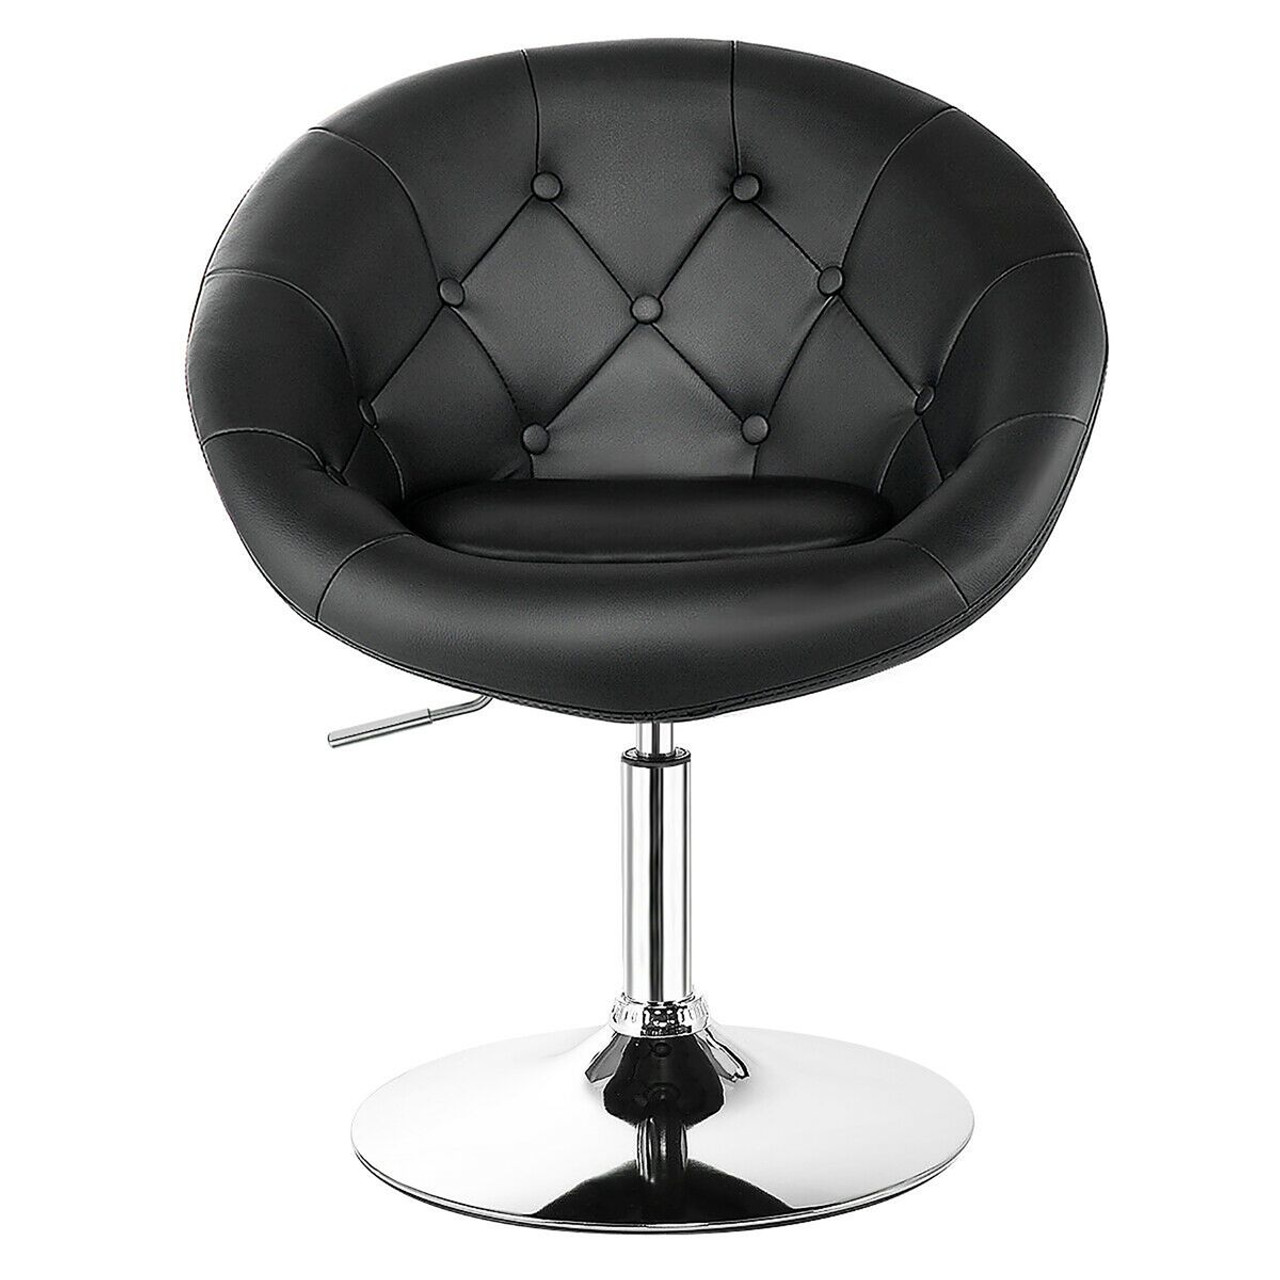 Costway Adjustable PU Leather Swivel Chair with Round Tufted Back product image